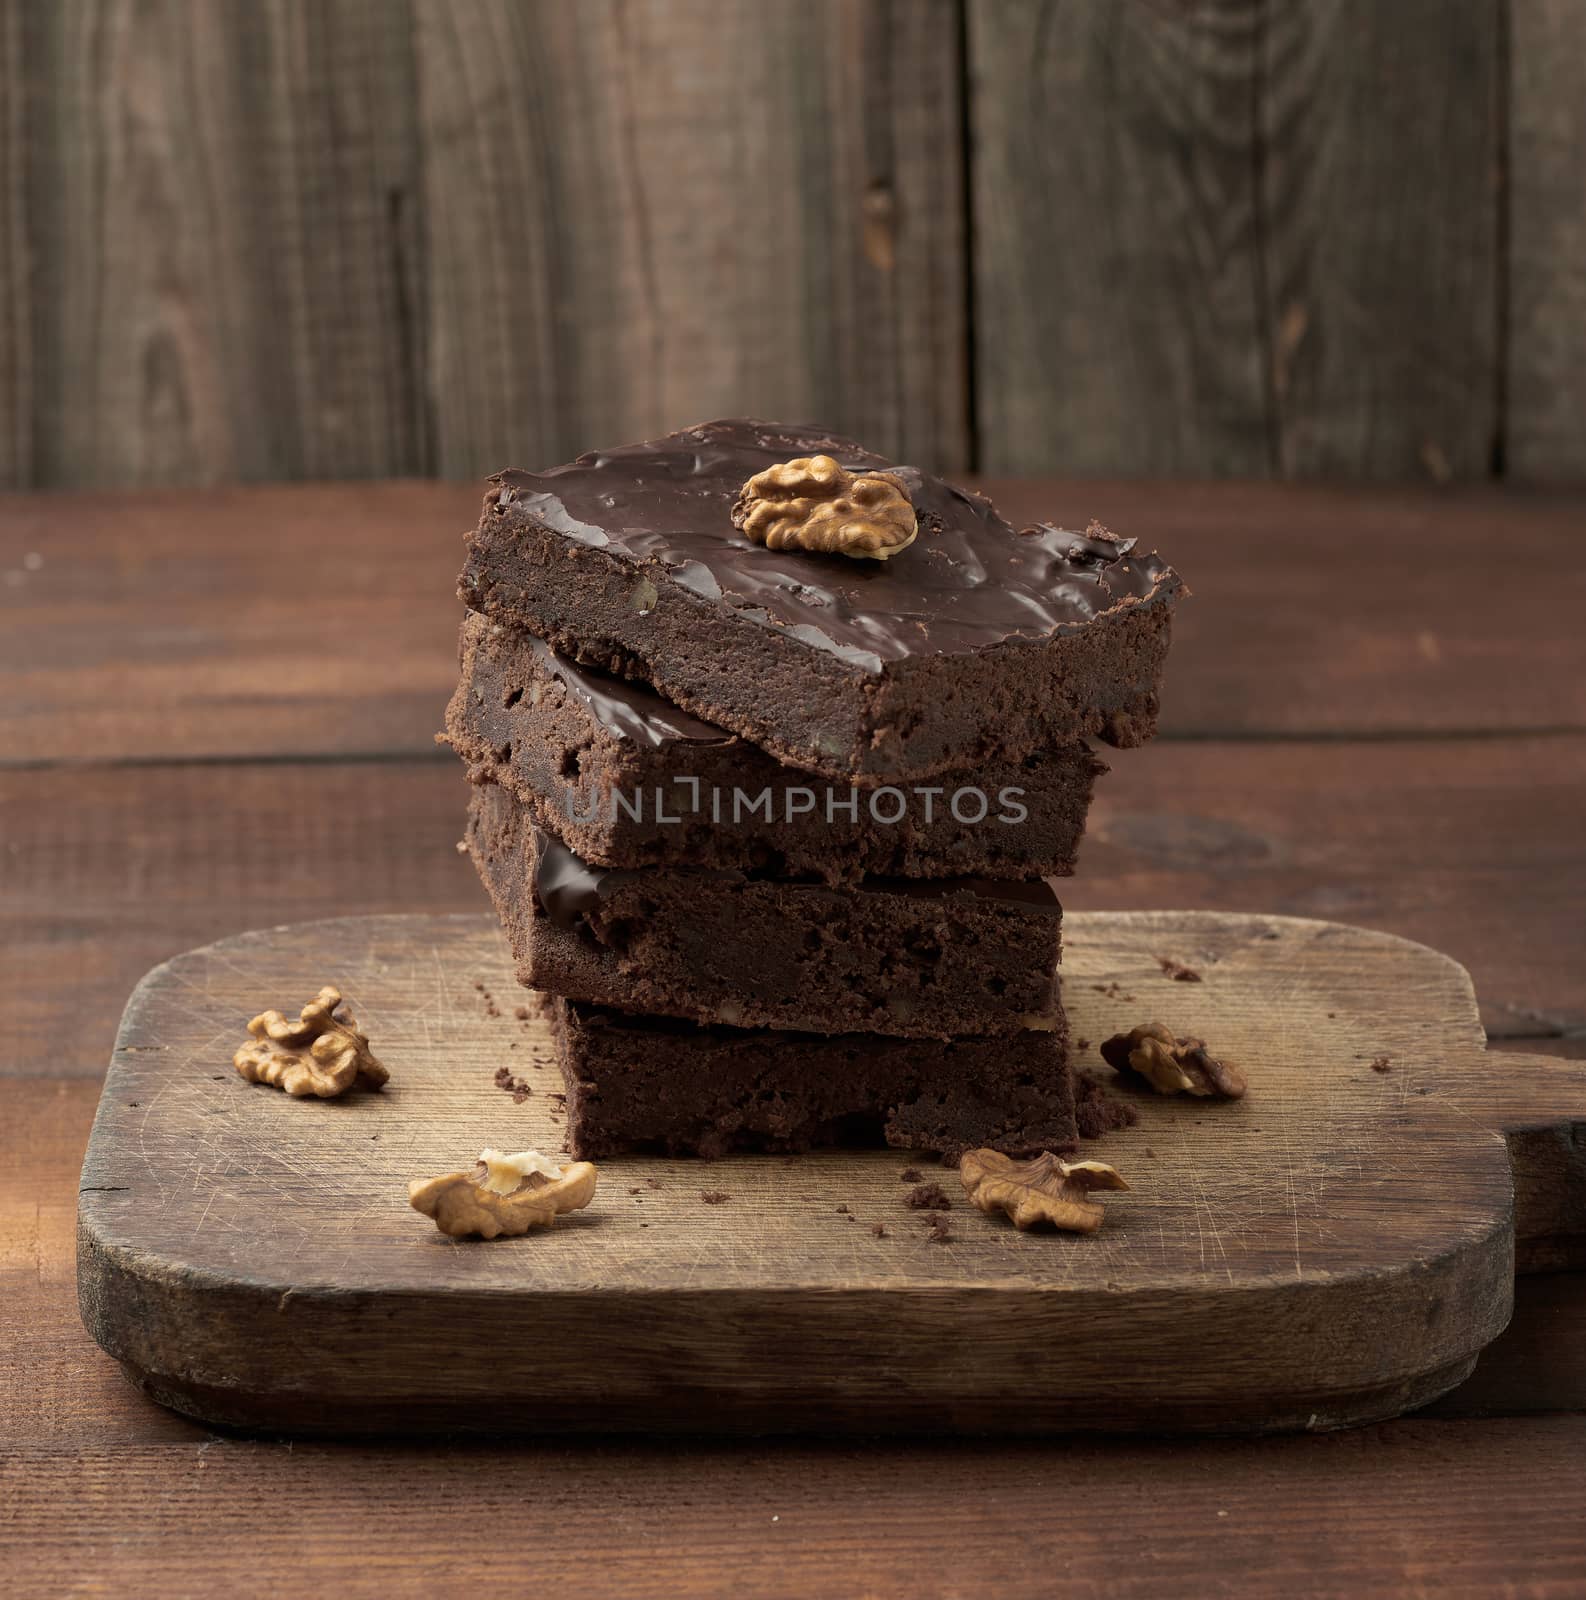 stack of square baked slices of brownie chocolate cake with walnuts on a wooden surface. Cooked homemade food. Chocolate pastry. Sweet meal, homemade dessert. Wooden table.